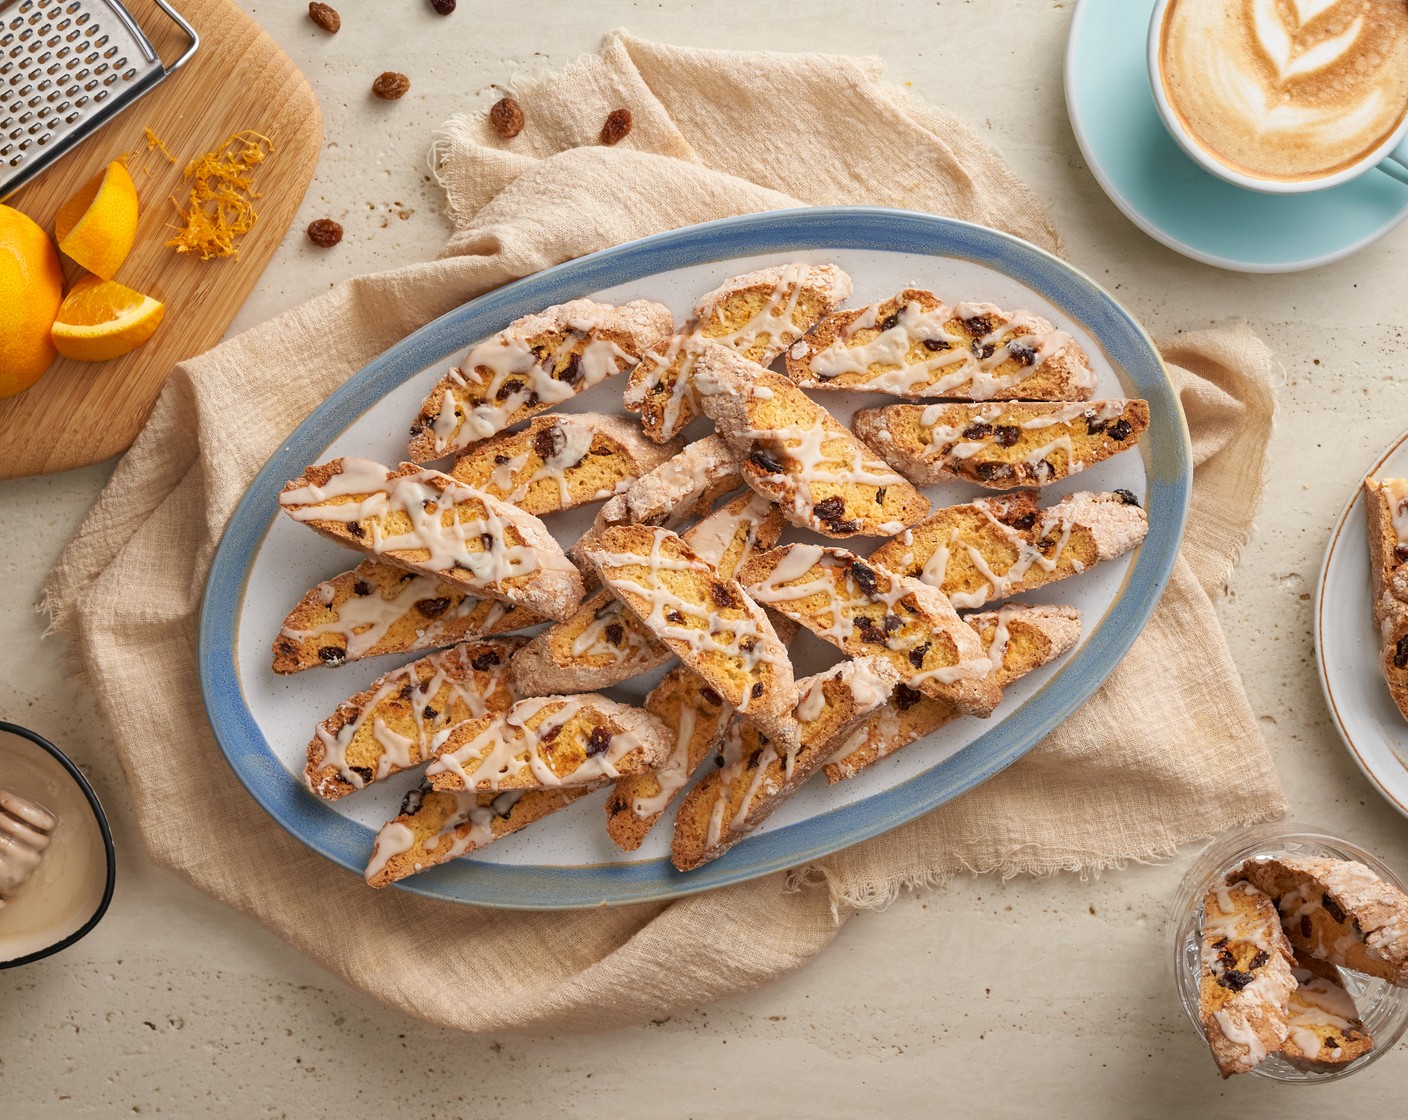 step 15 Now, dip and savor these delightful biscotti alongside your favorite cup of coffee. Serve with the cocktails and enjoy!